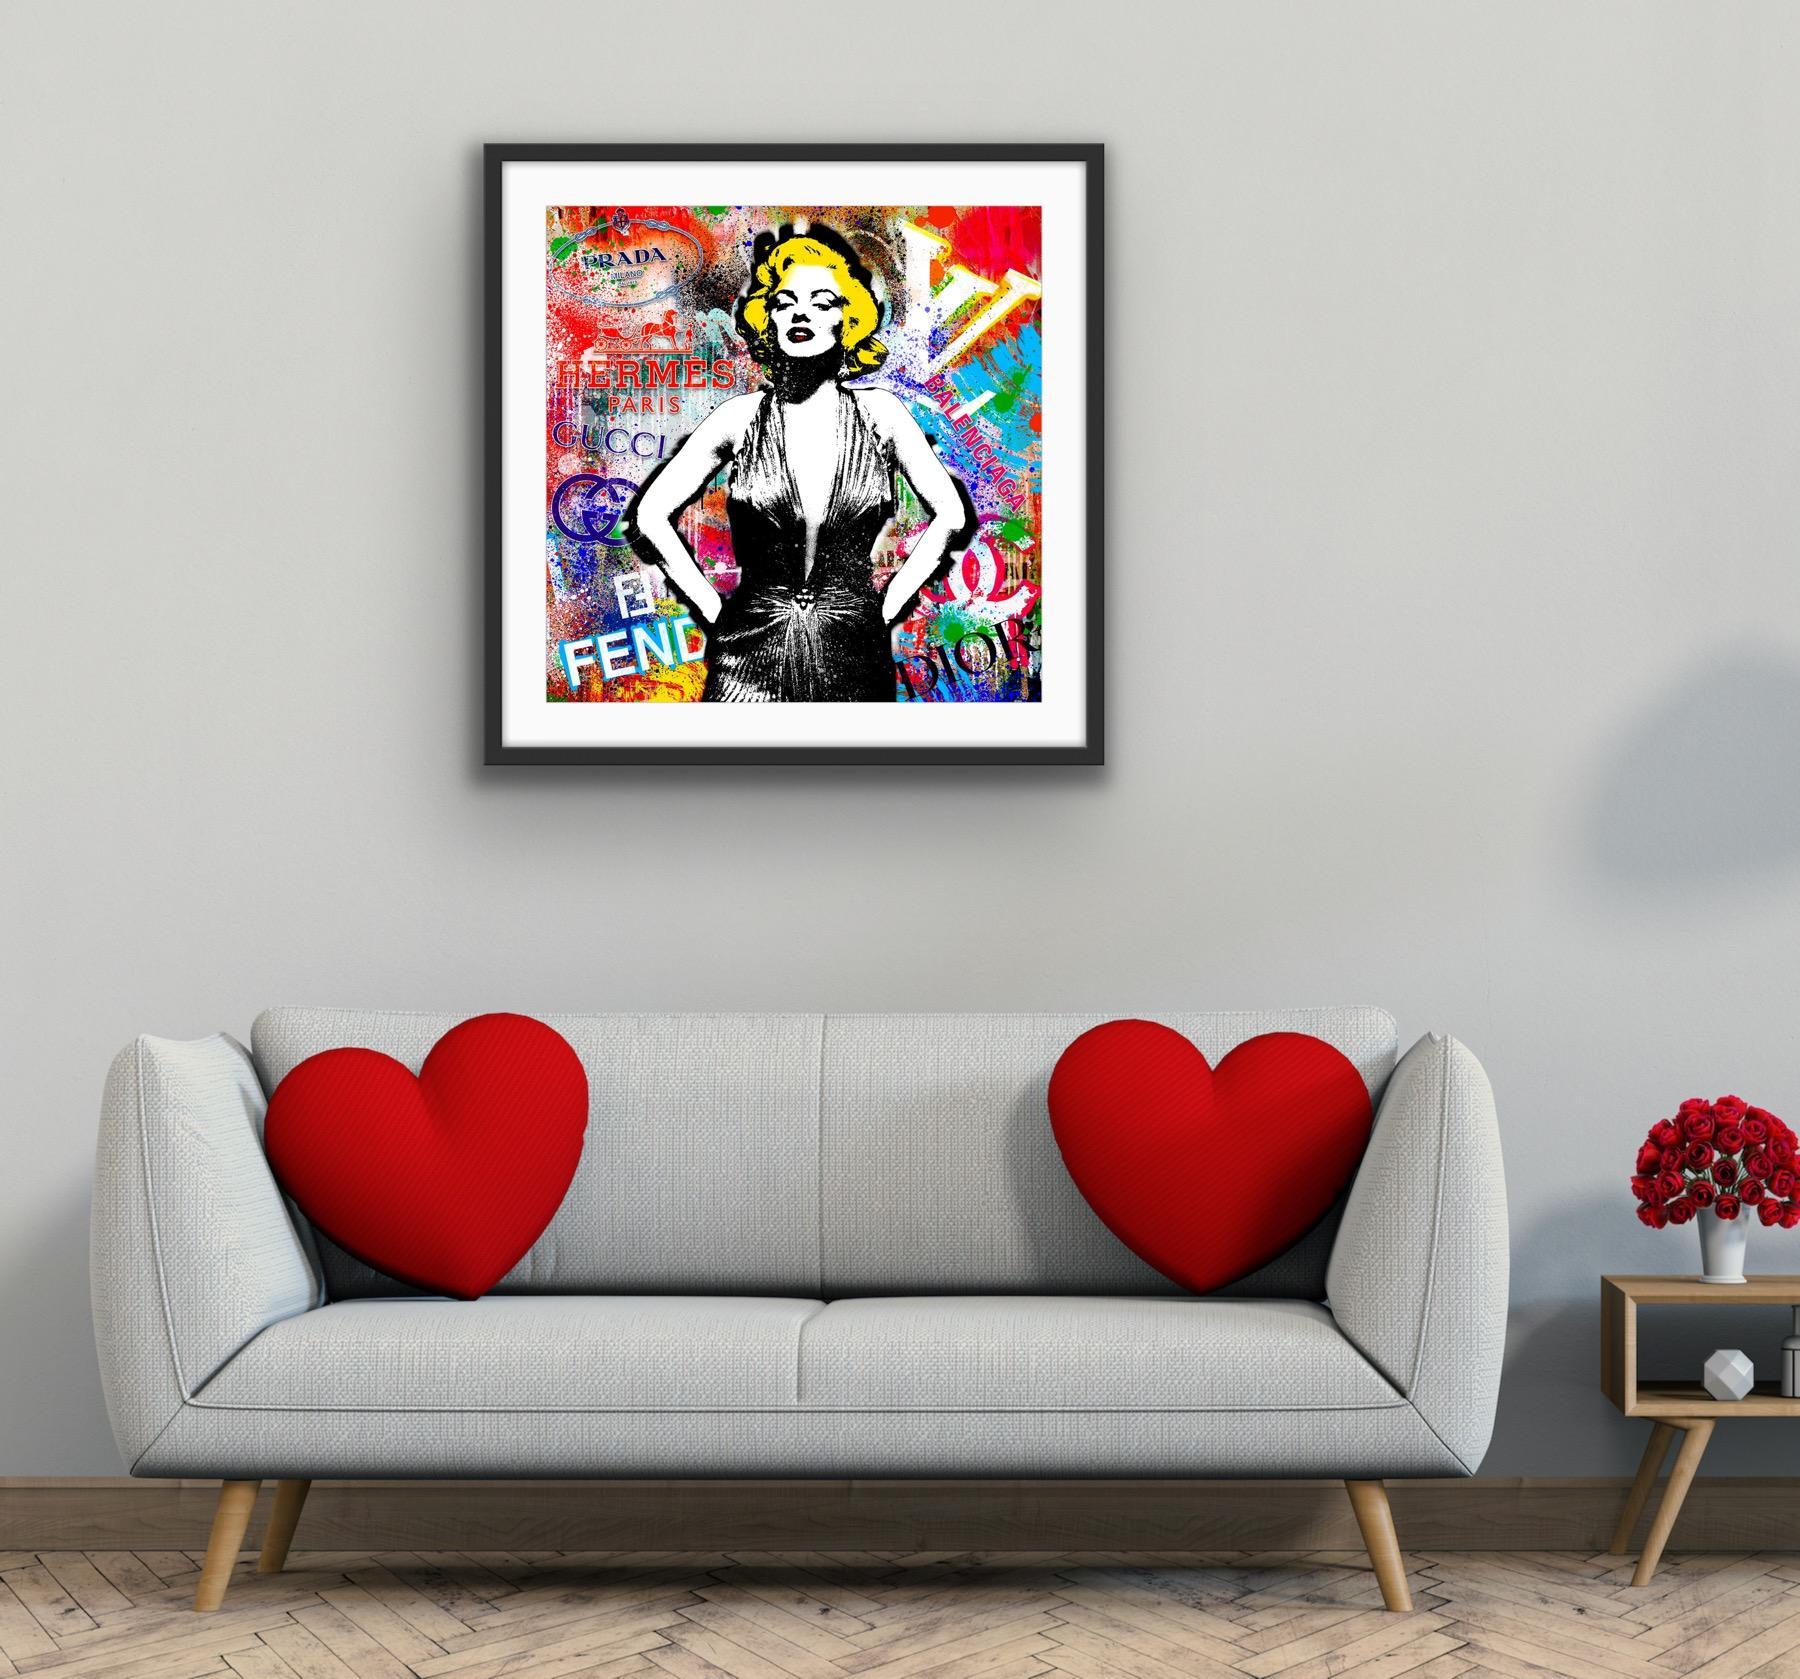 Marilyn as Vicky Debevoise - Pop Art Print by Agent X